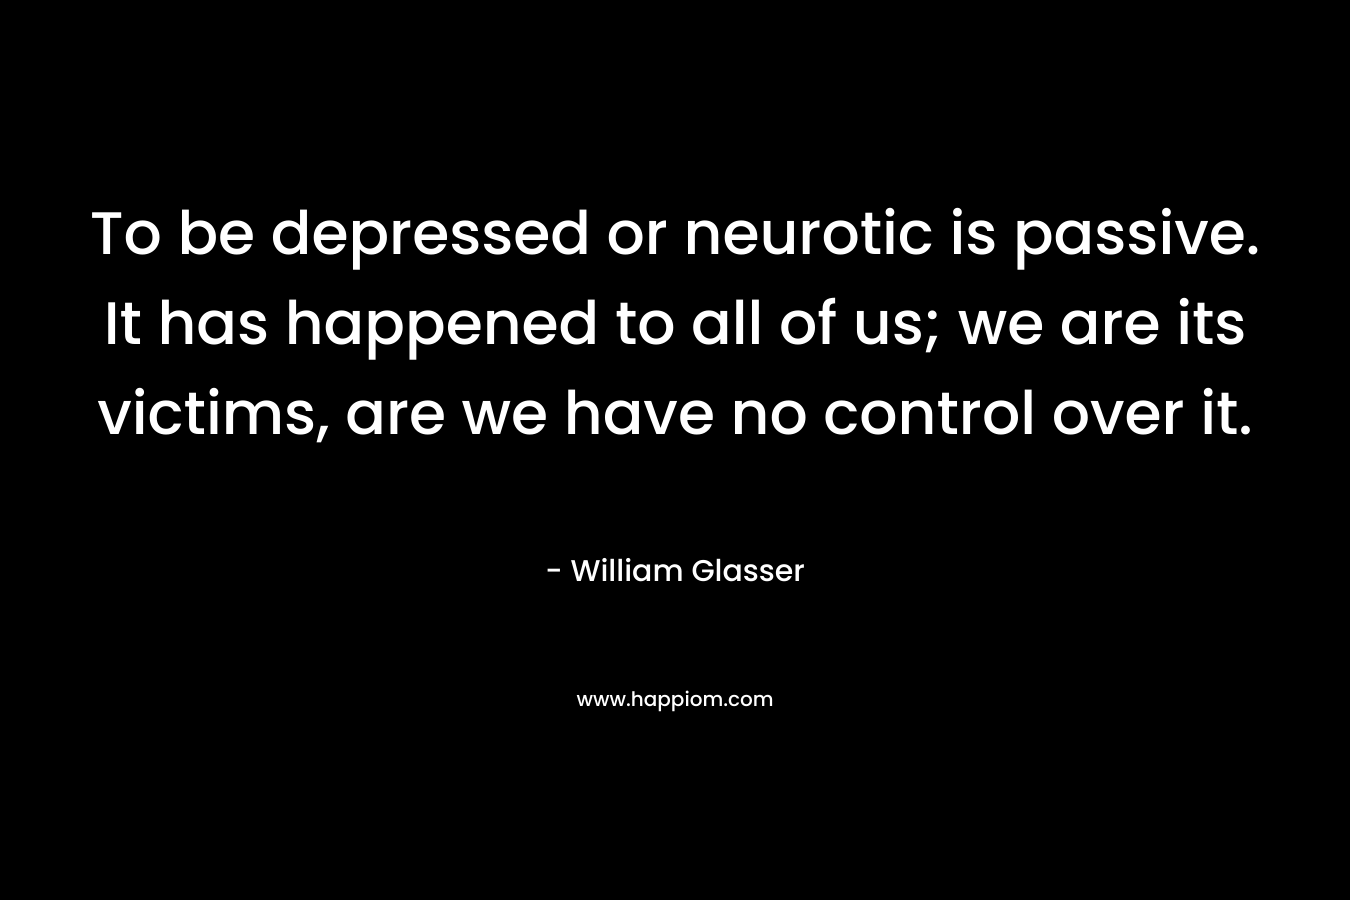 To be depressed or neurotic is passive. It has happened to all of us; we are its victims, are we have no control over it. – William Glasser